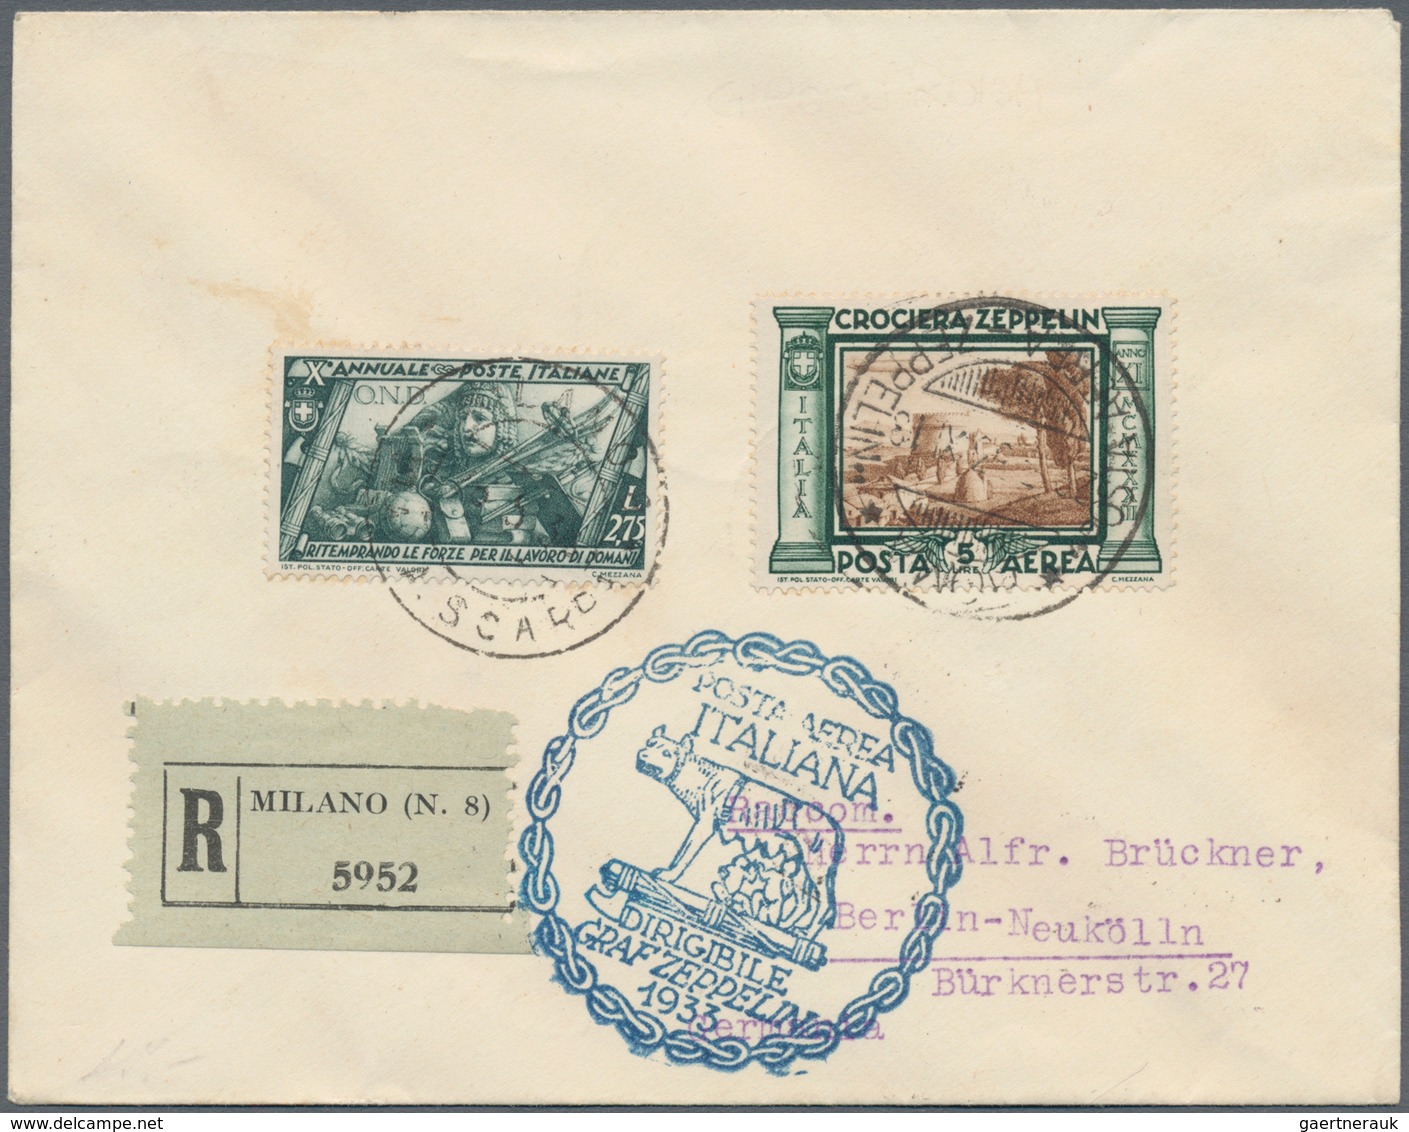 00644A Zeppelinpost Europa: 1933, ITALY TRIP LZ 127, group of 13 covers/cards franked with Italian (12) and